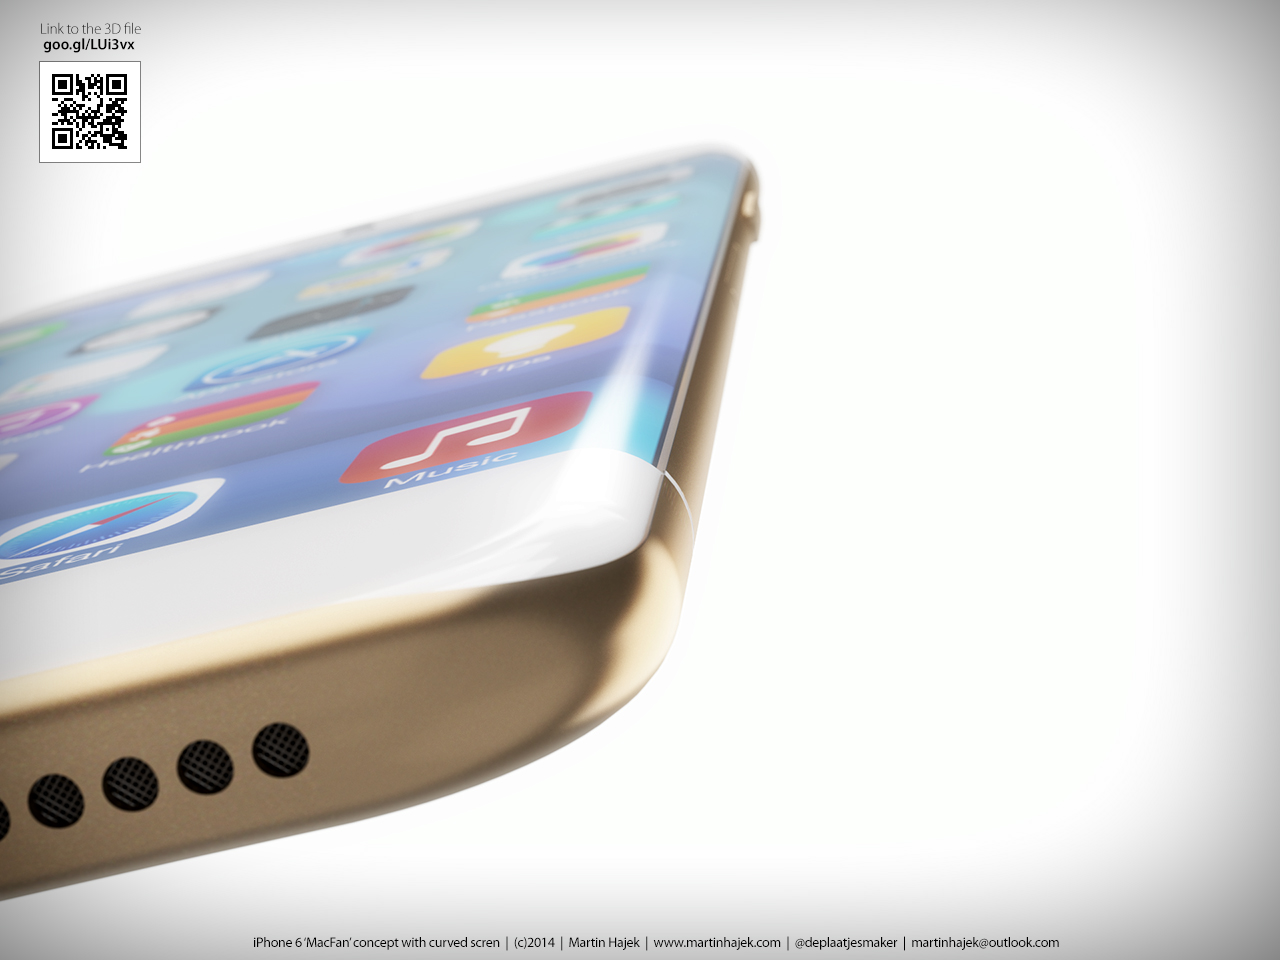 A curved iPhone 6 display could be on the way according to a new report.